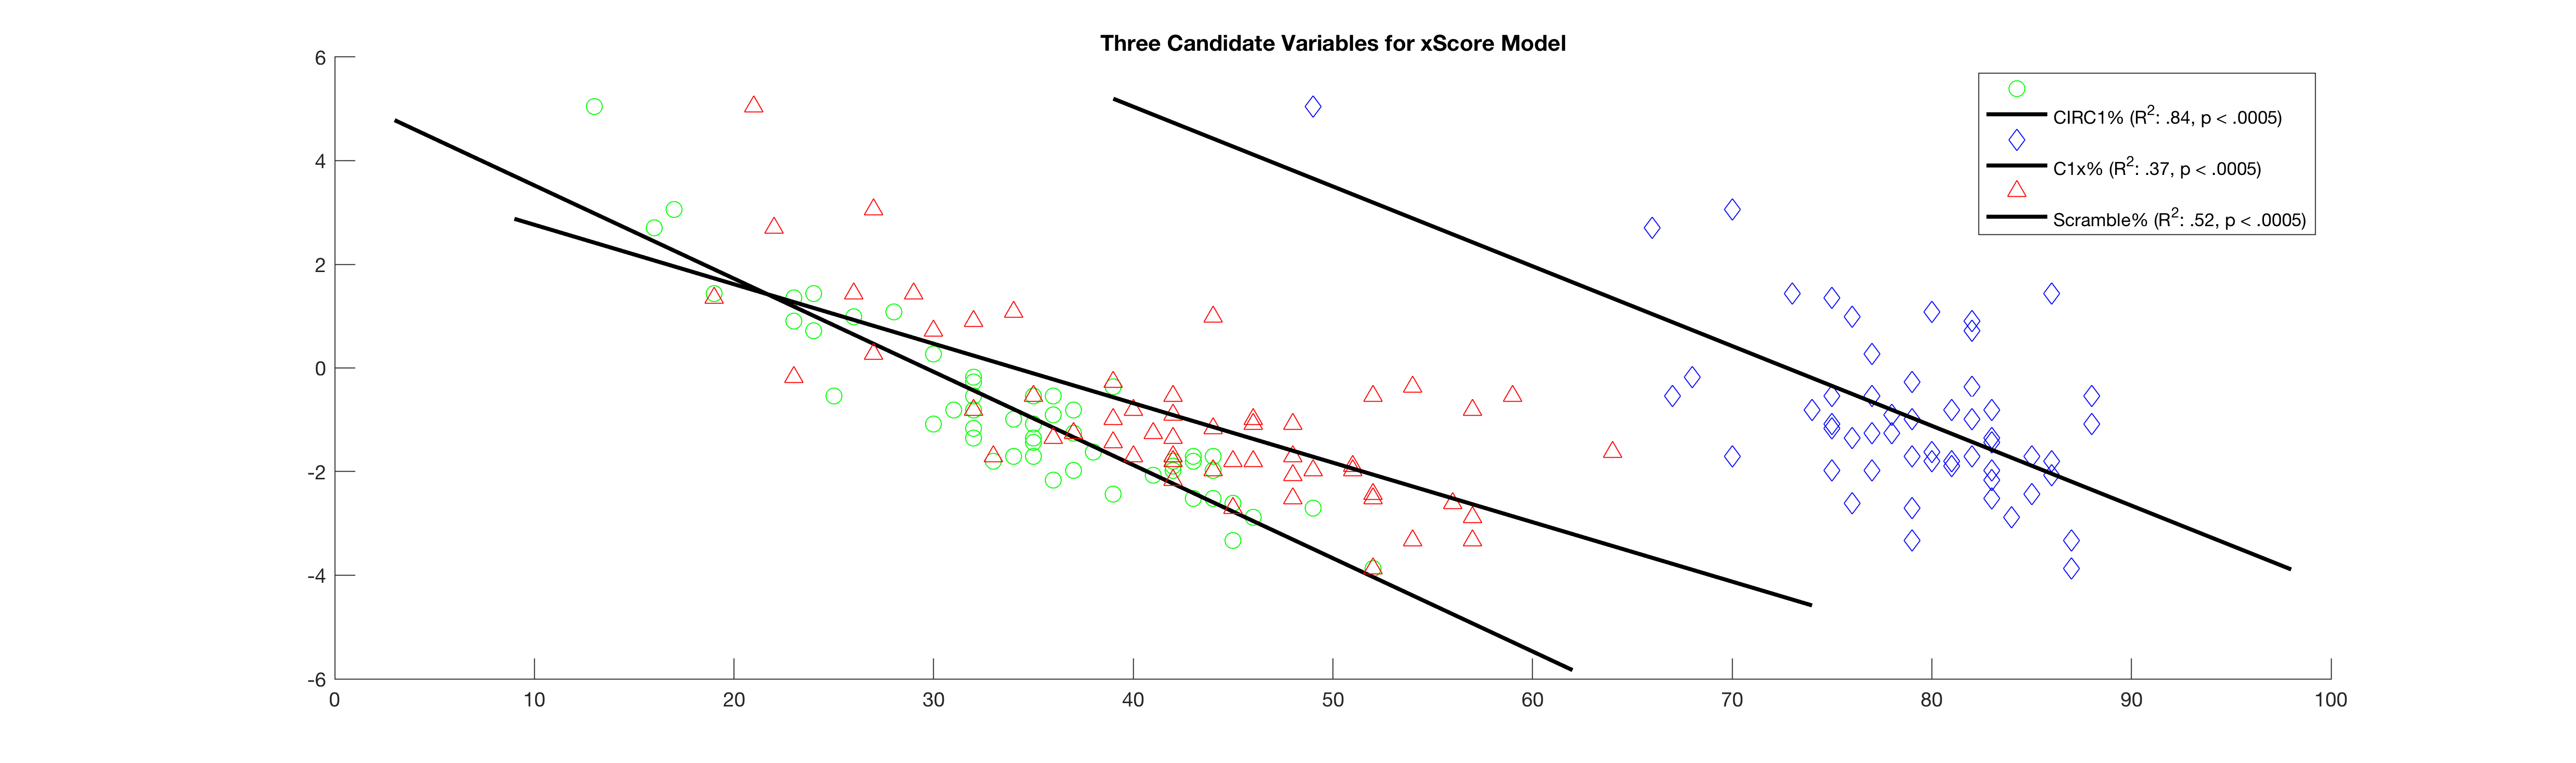 Three Candidate Variables for xScore Model